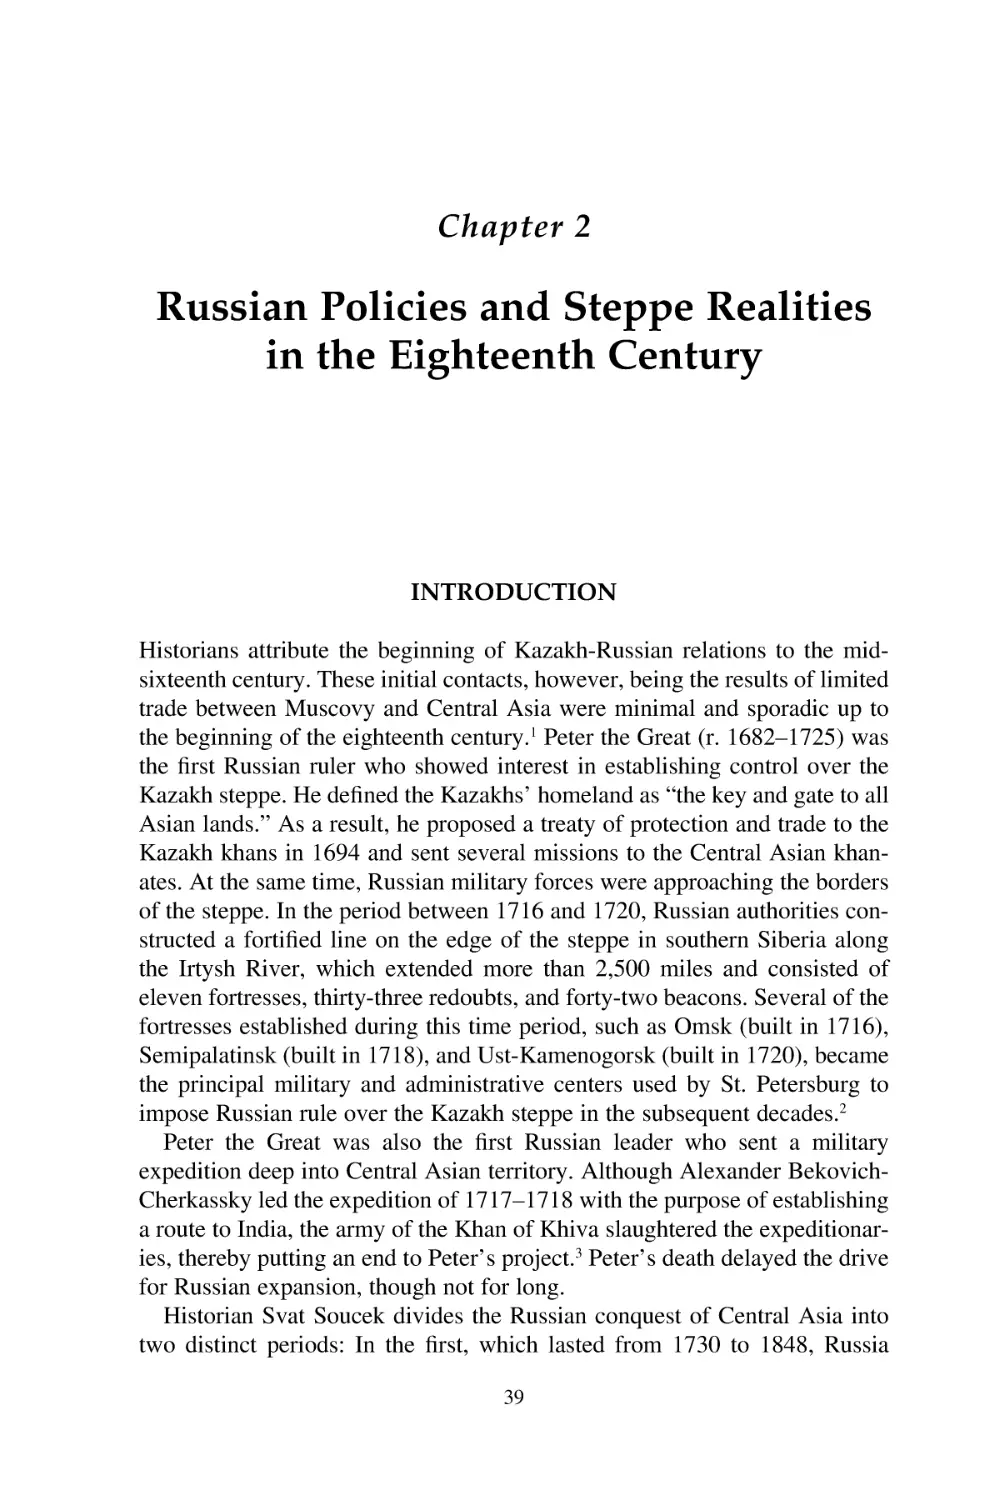 2. Russian Policies and Steppe Realities in the Eighteenth Century